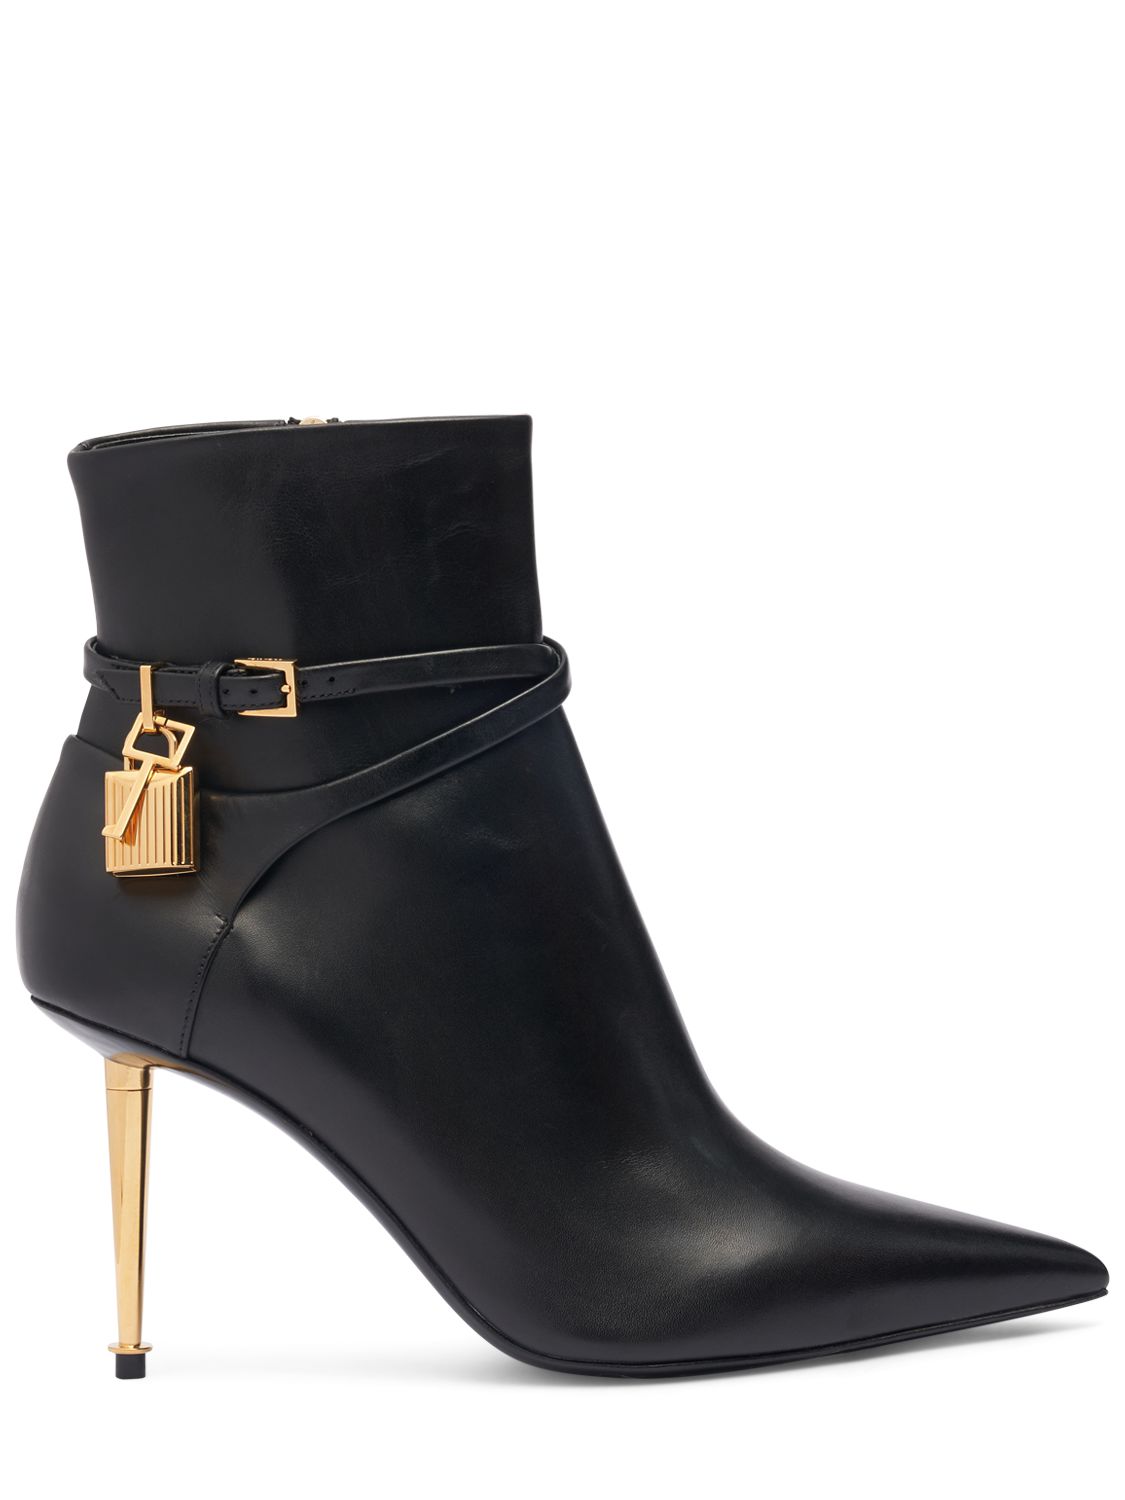 Mm Padlock Leather Ankle Boots - TOM FORD - Modalova